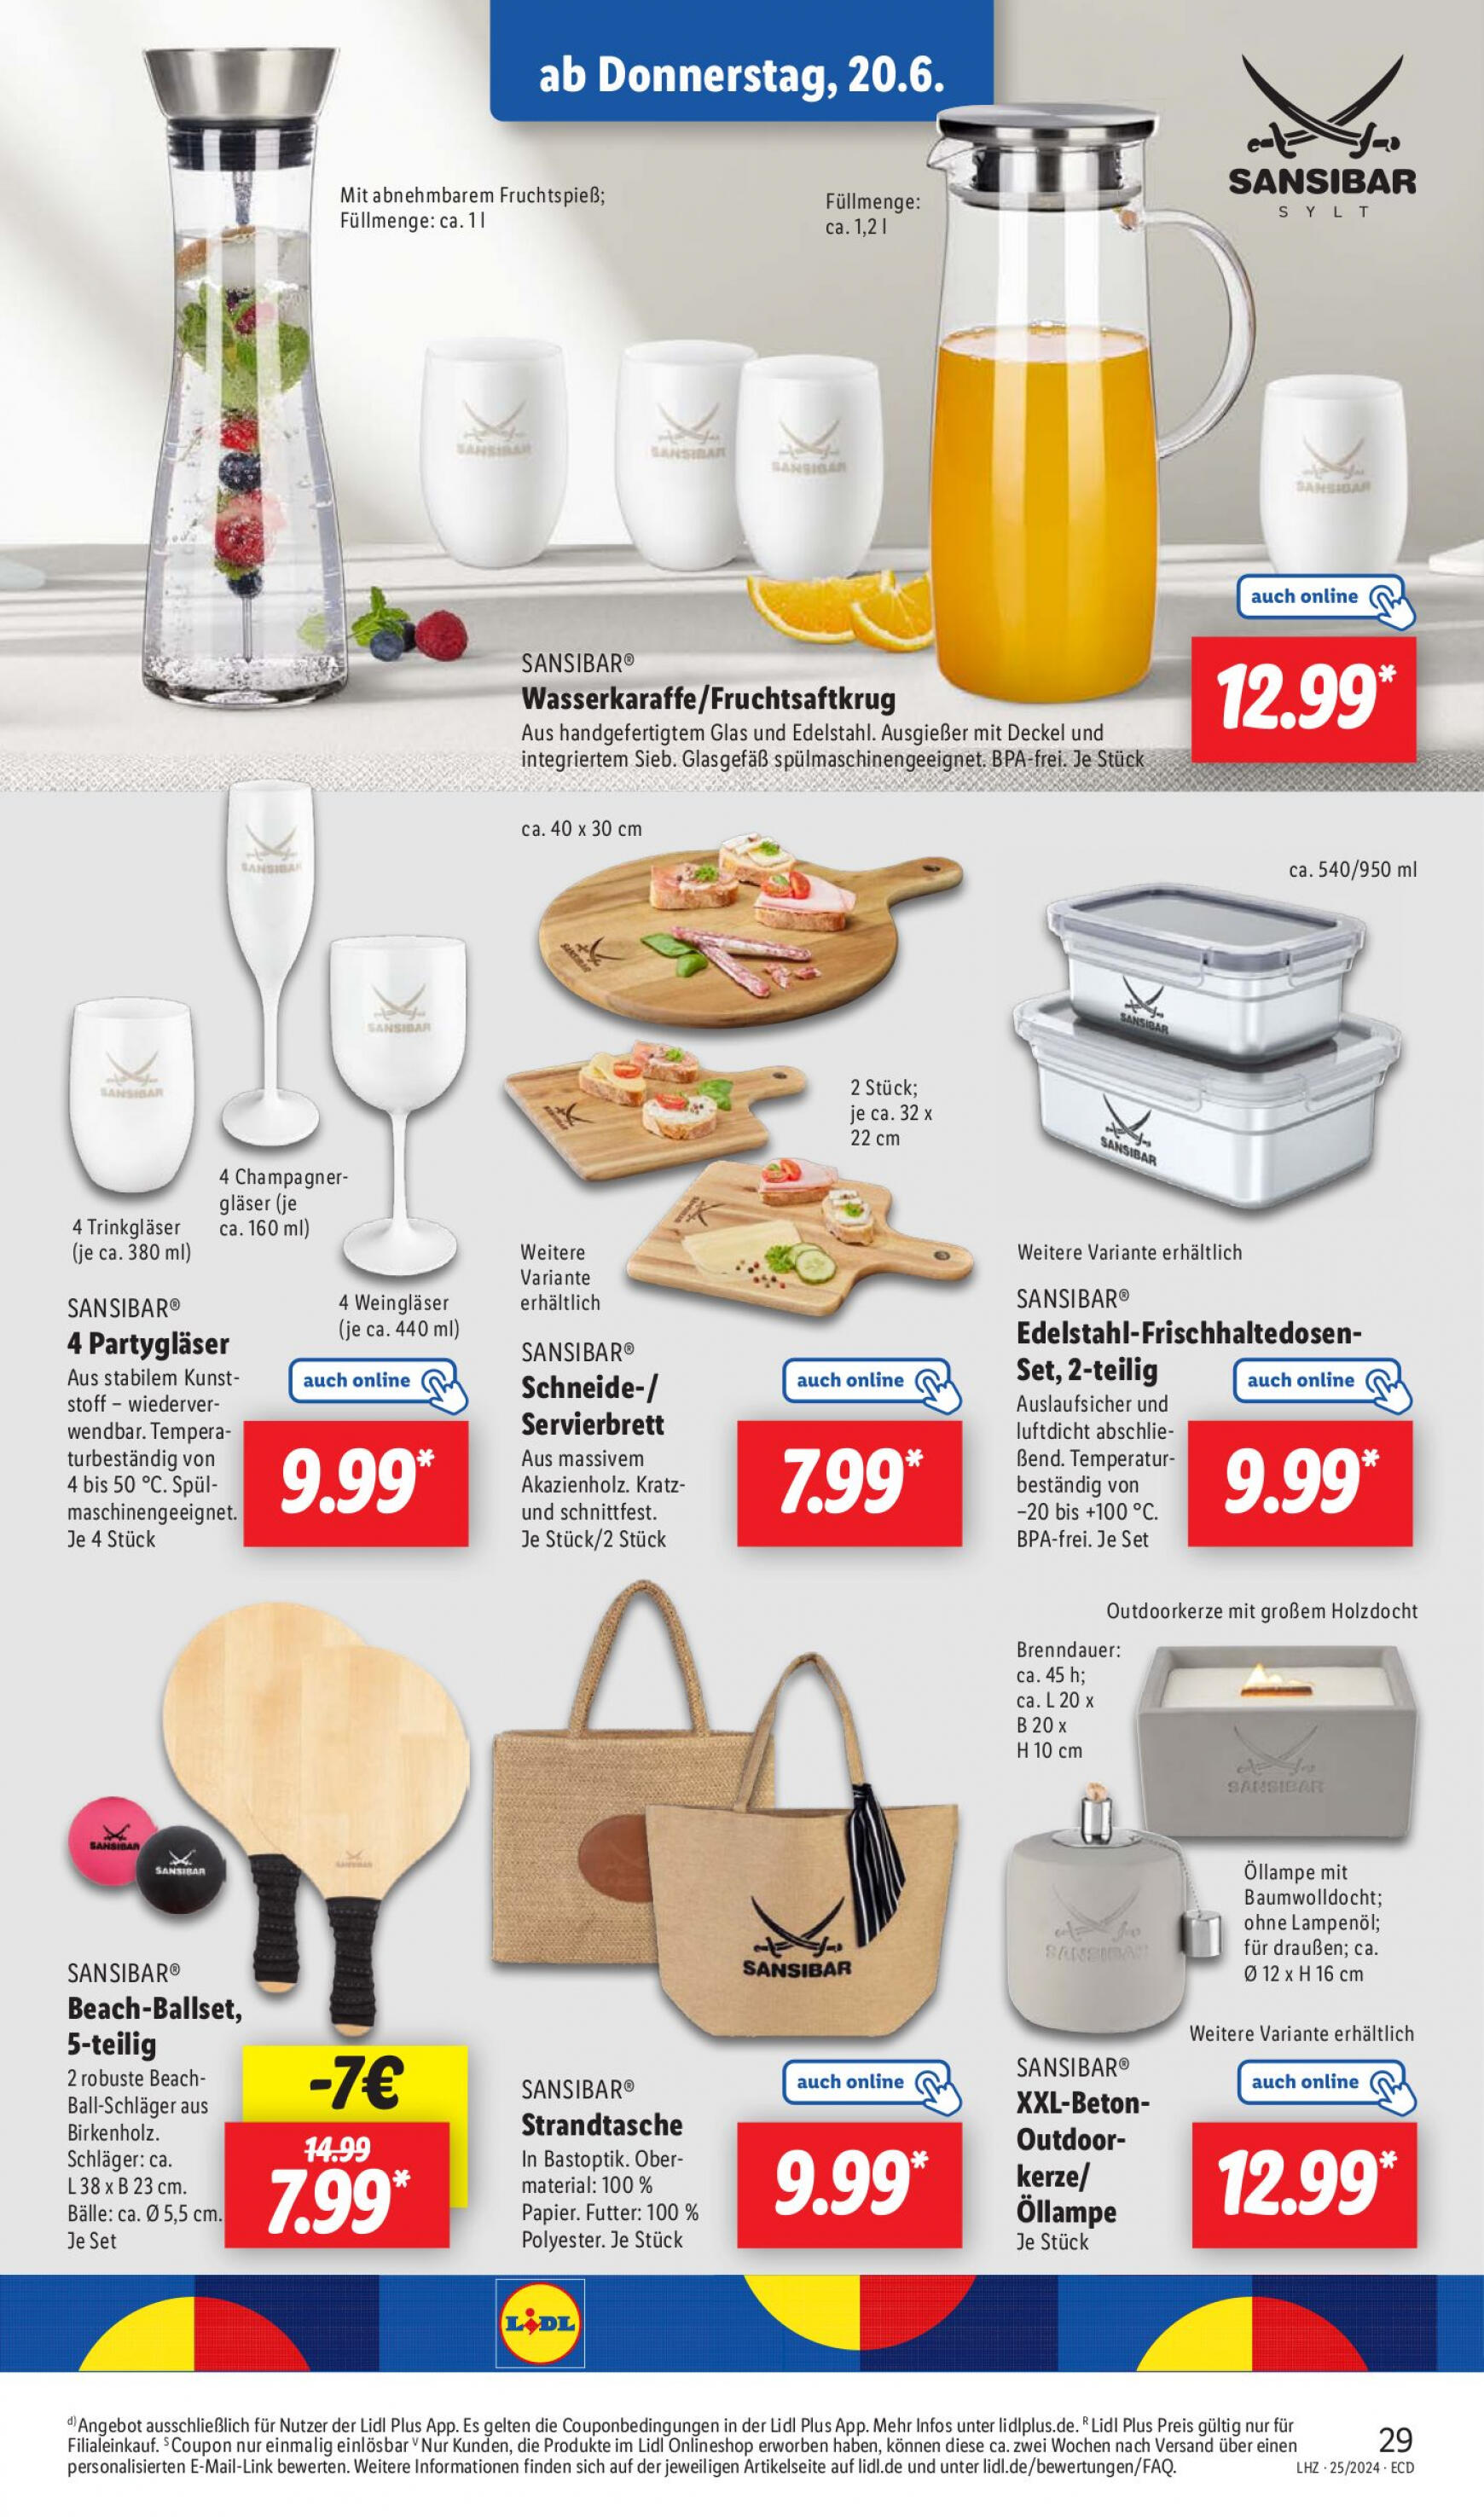 lidl - Flyer Lidl aktuell 17.06. - 22.06. - page: 35